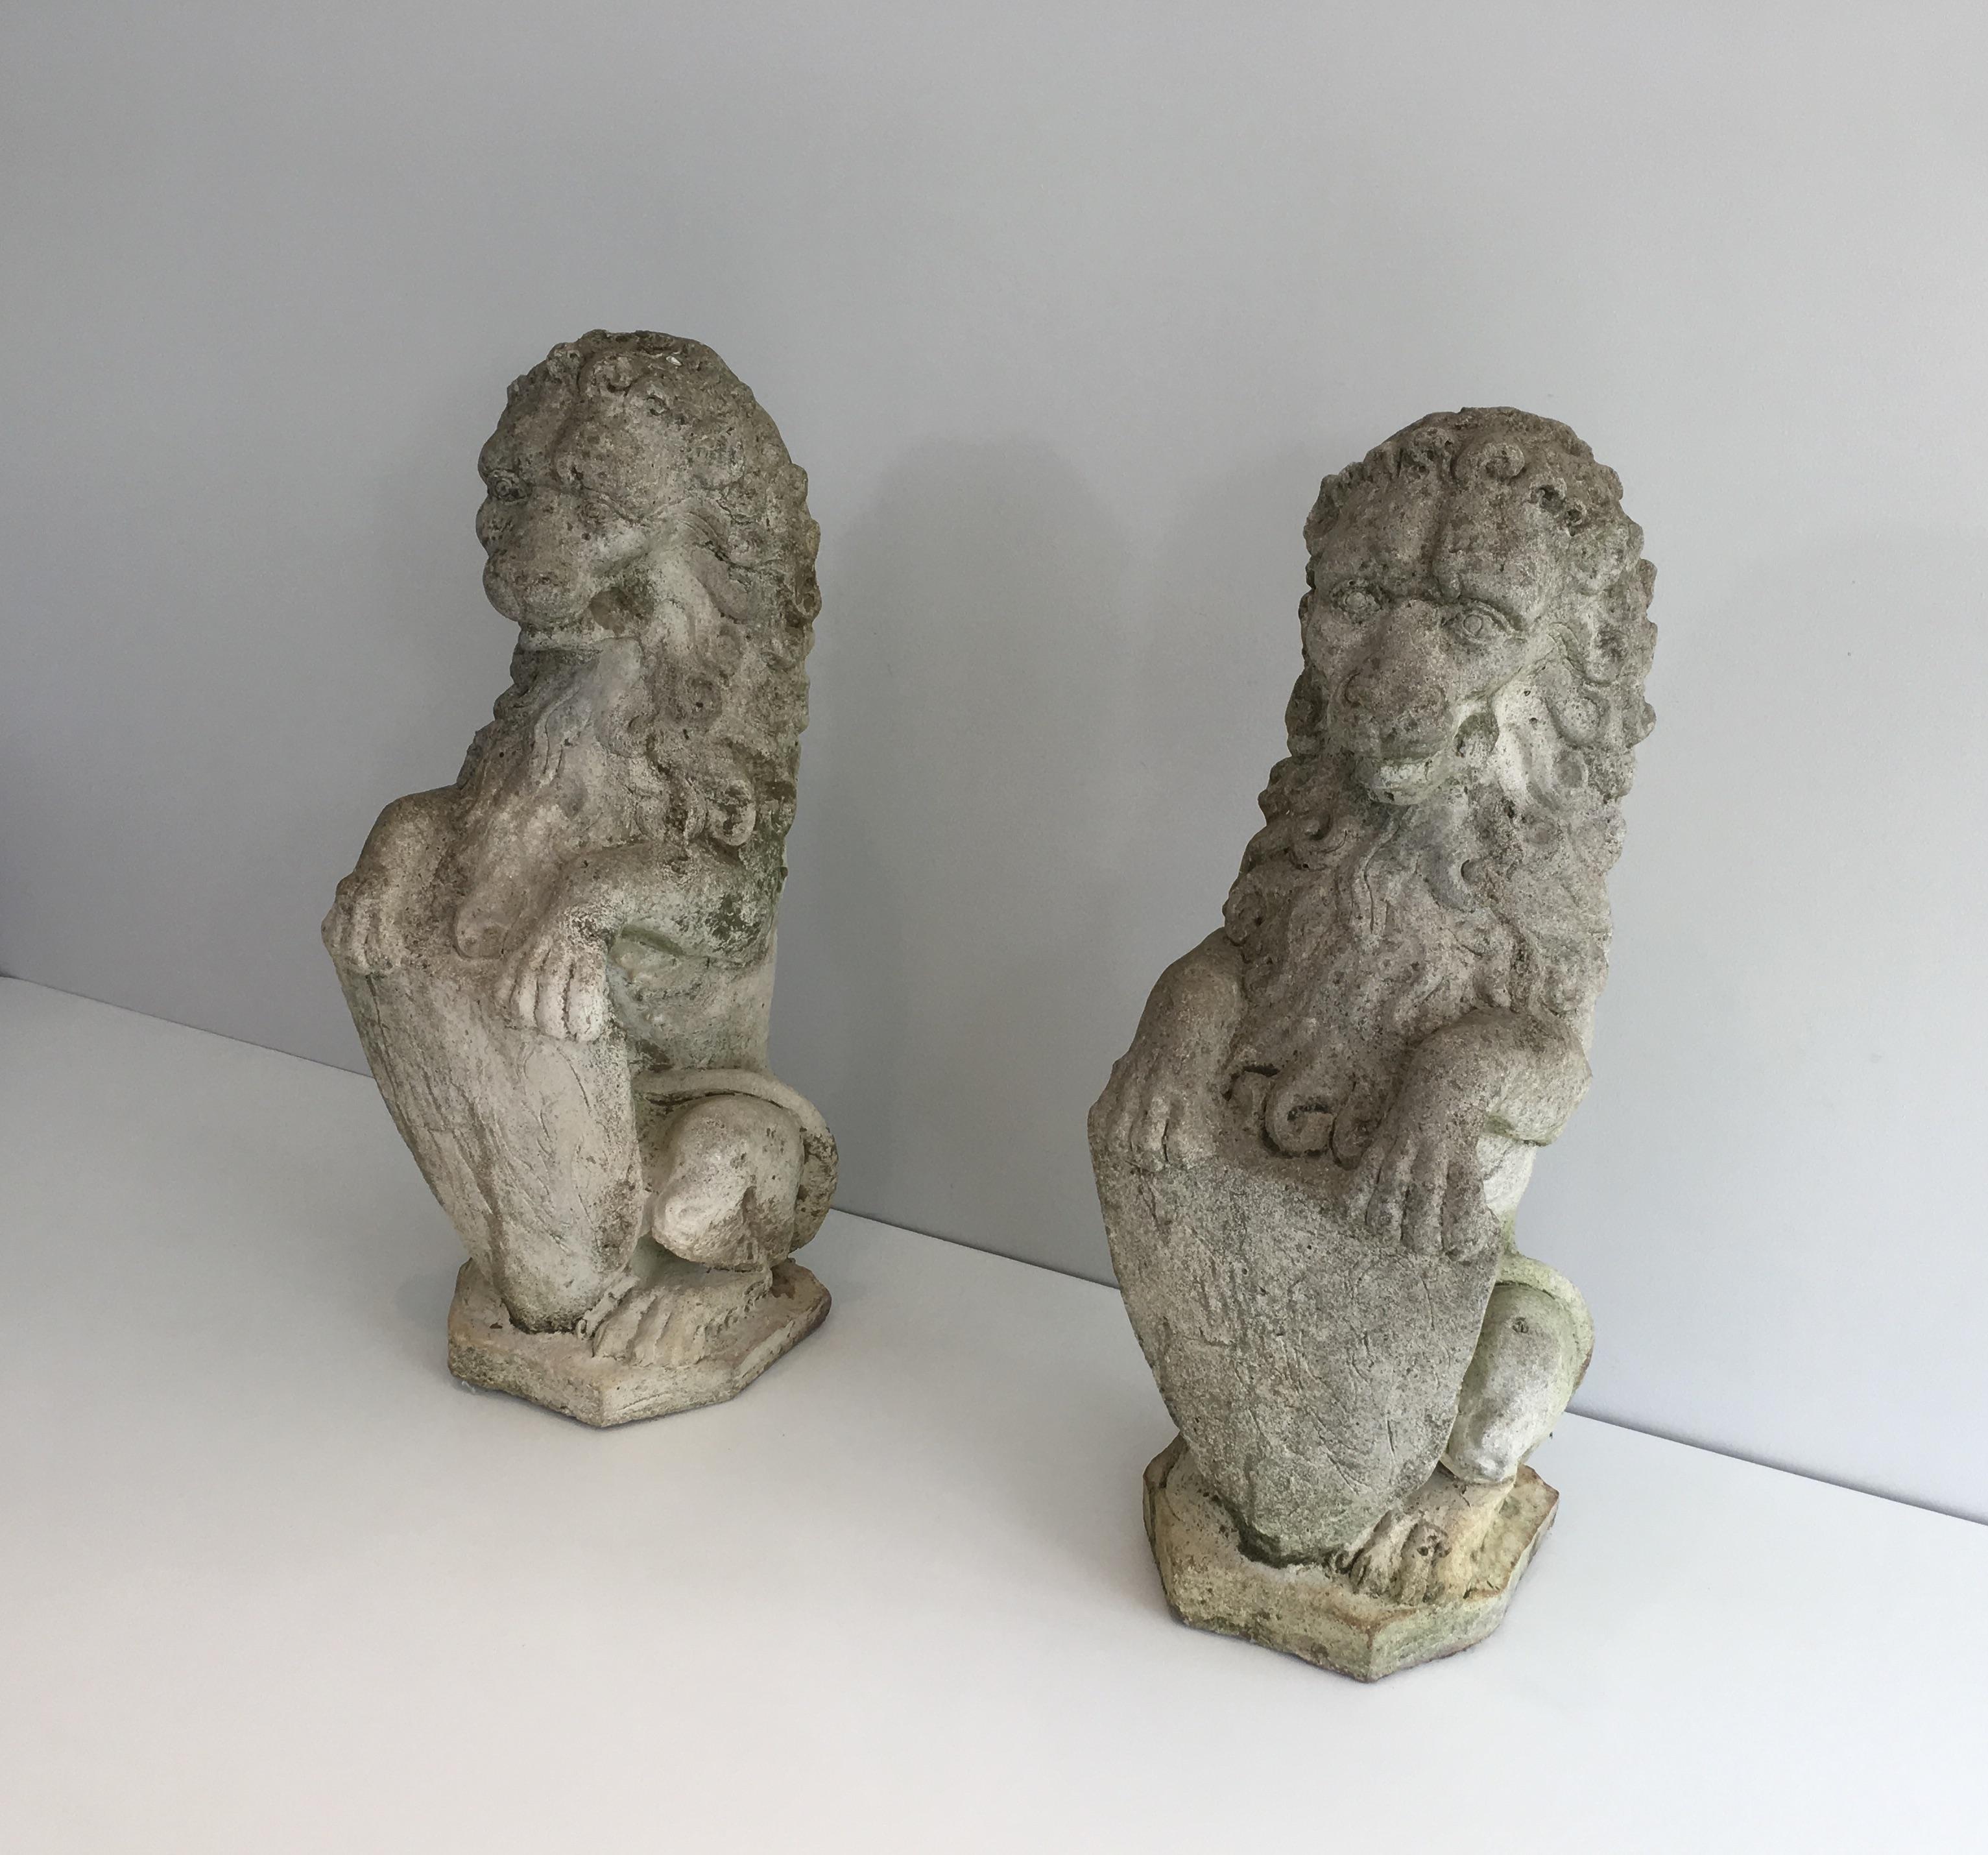 This pair of decorative lions standing with a shield are made of cement lions. This is a French work, circa 1950.